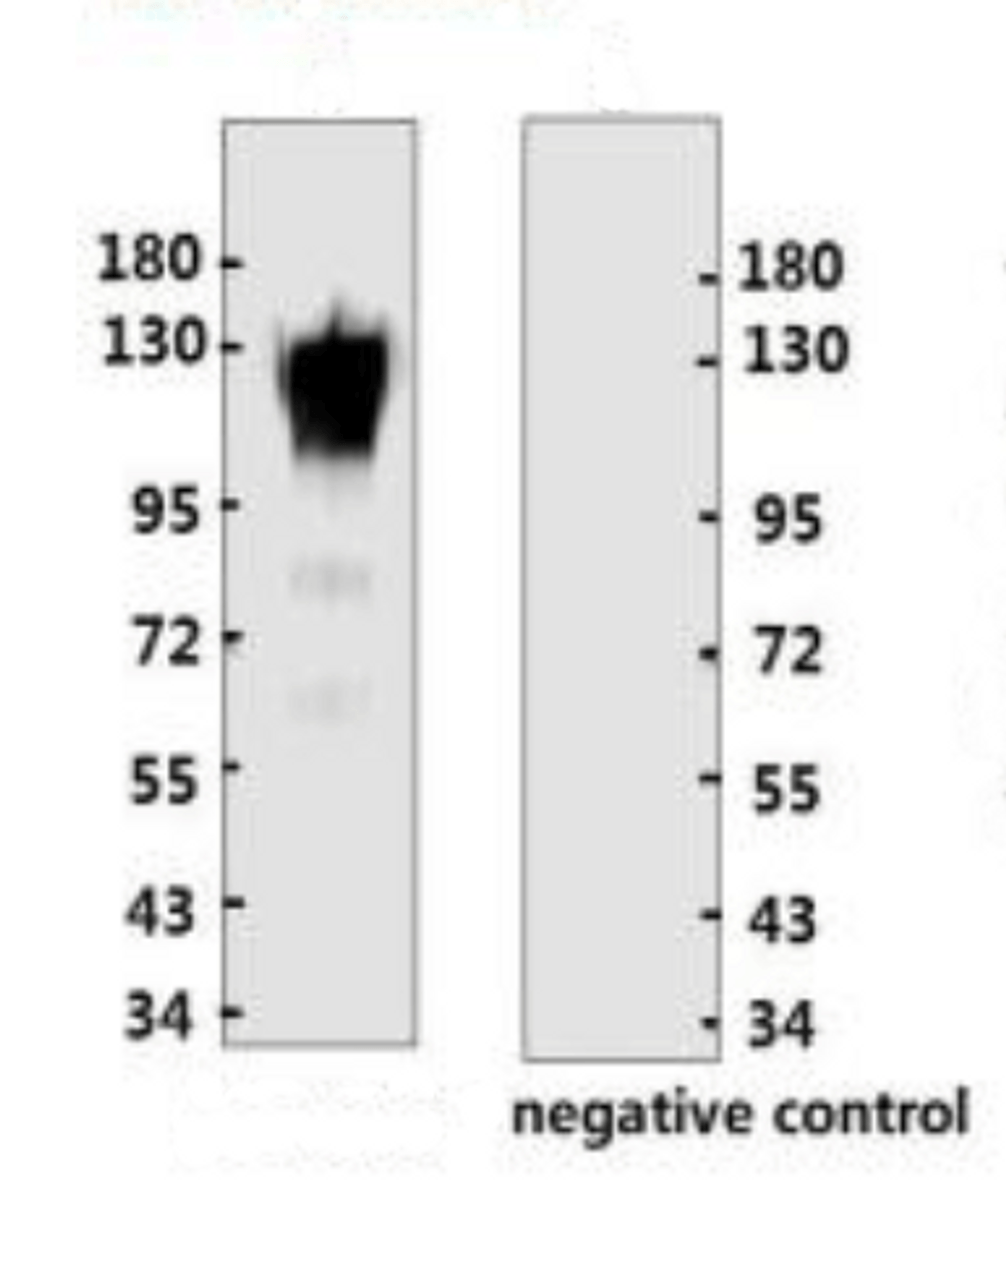 <strong>Figure 1 Western Blot Validation with Recombinant Protein</strong><br>Loading: 1ug of ACE-2 recombinant protein, 10-014, per lane. Antibodies: ACE2 Antibody, 10-531, 1:2000. Secondary: Goat anti-rabbit IgG (H+L) -HRP conjugate at 1:20000 dilution.